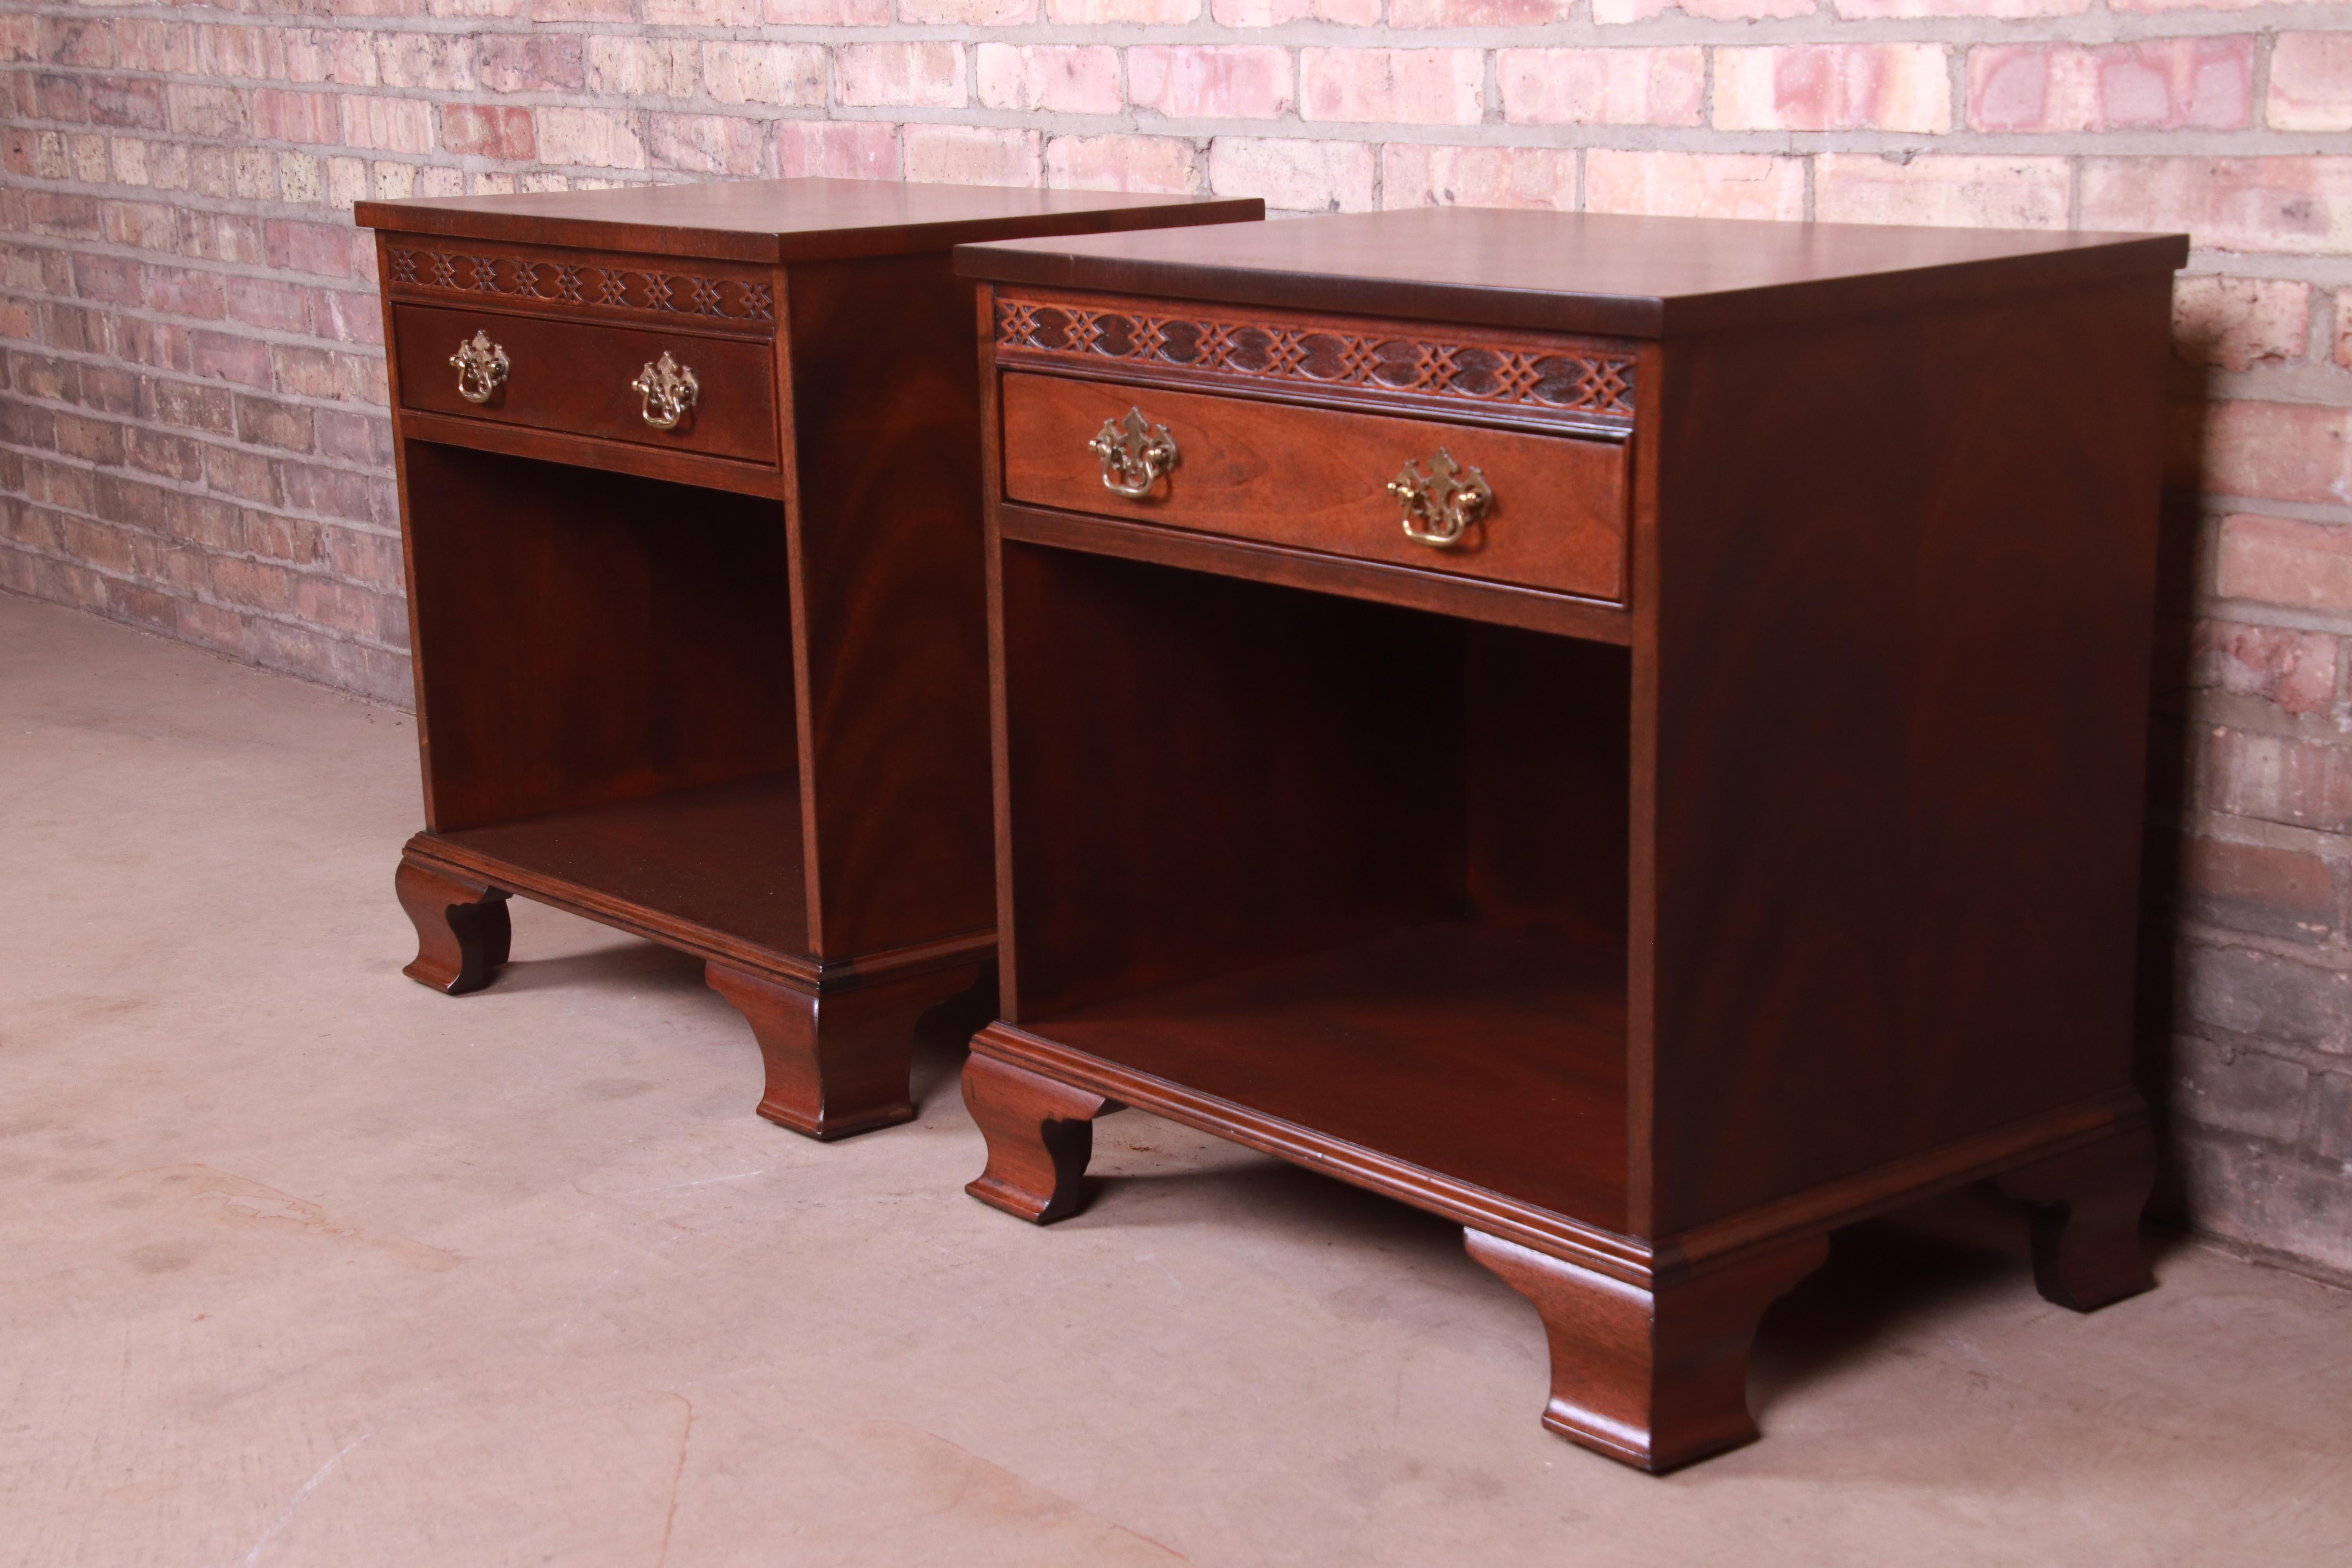 20th Century Baker Furniture Chippendale Carved Mahogany Nightstands, Newly Refinished For Sale